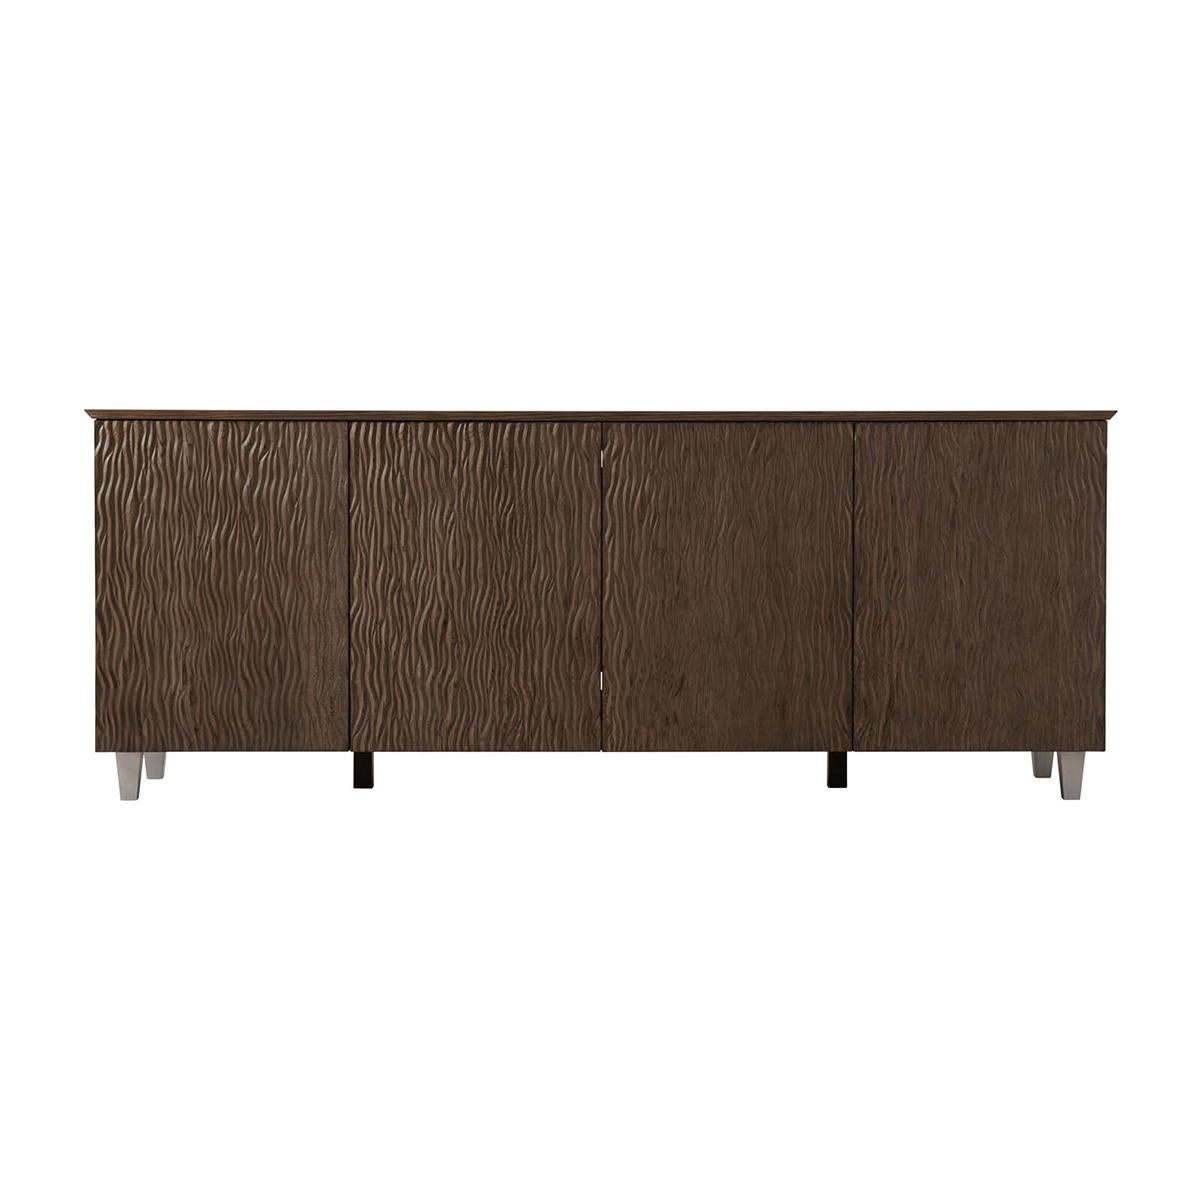 Organic Modern Ripple oak sideboard with a rectangular knife edge top, brushed quarter oak veneers, with four ripple carved oak doors in our Charteris finish raised on square tapered legs.

Dimensions: 80